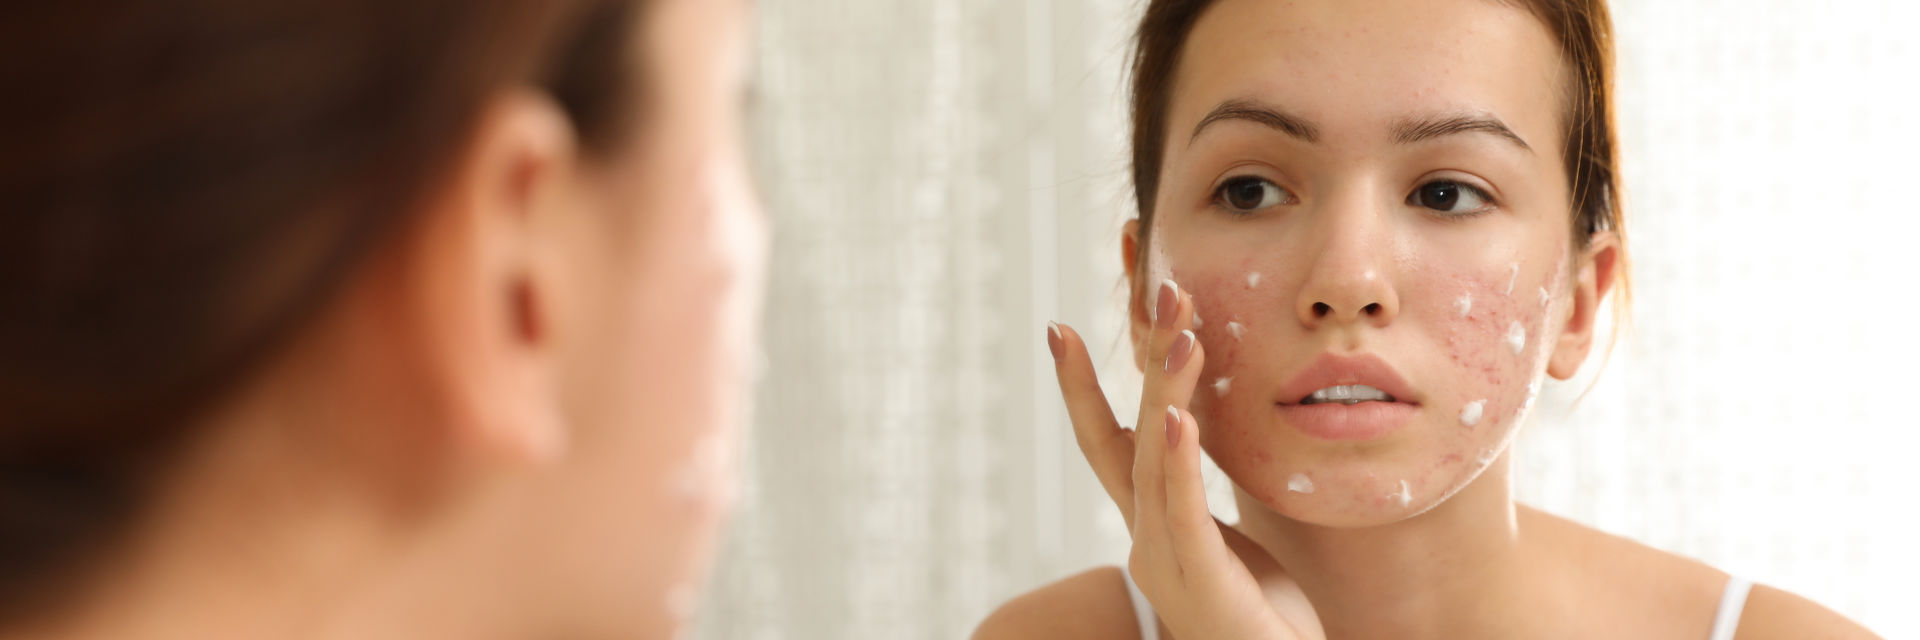 A young woman with acne applying cream on her face.